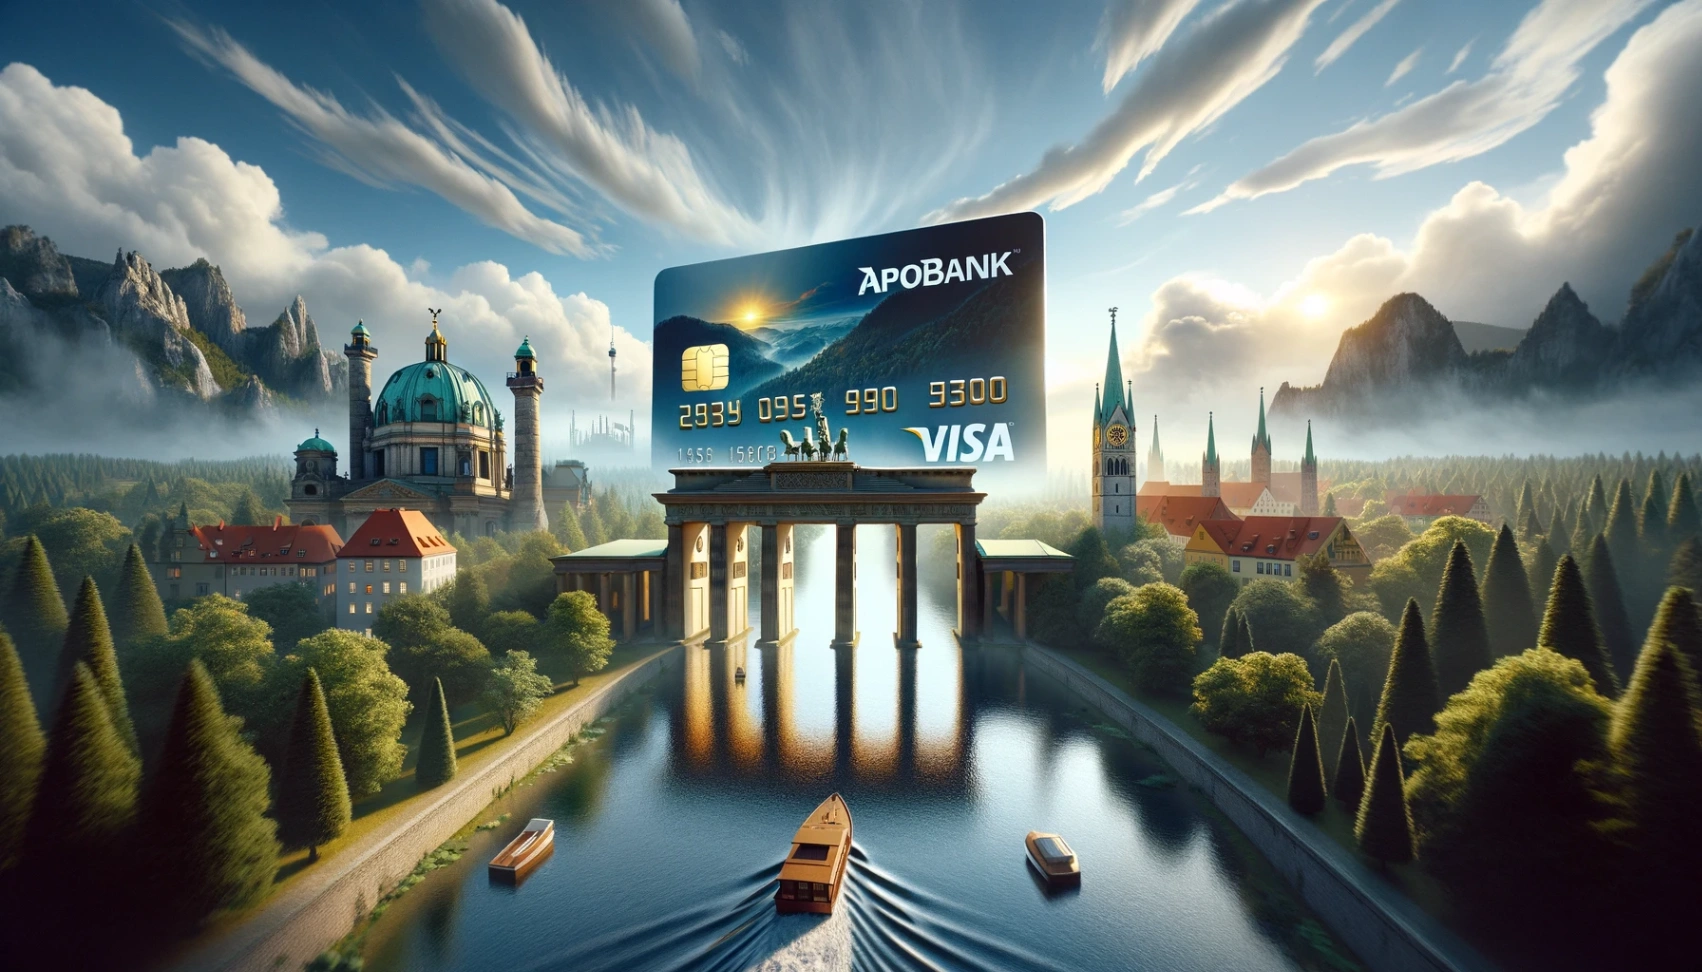 ApoBank Visa Card Credit Card - Learn How to Apply